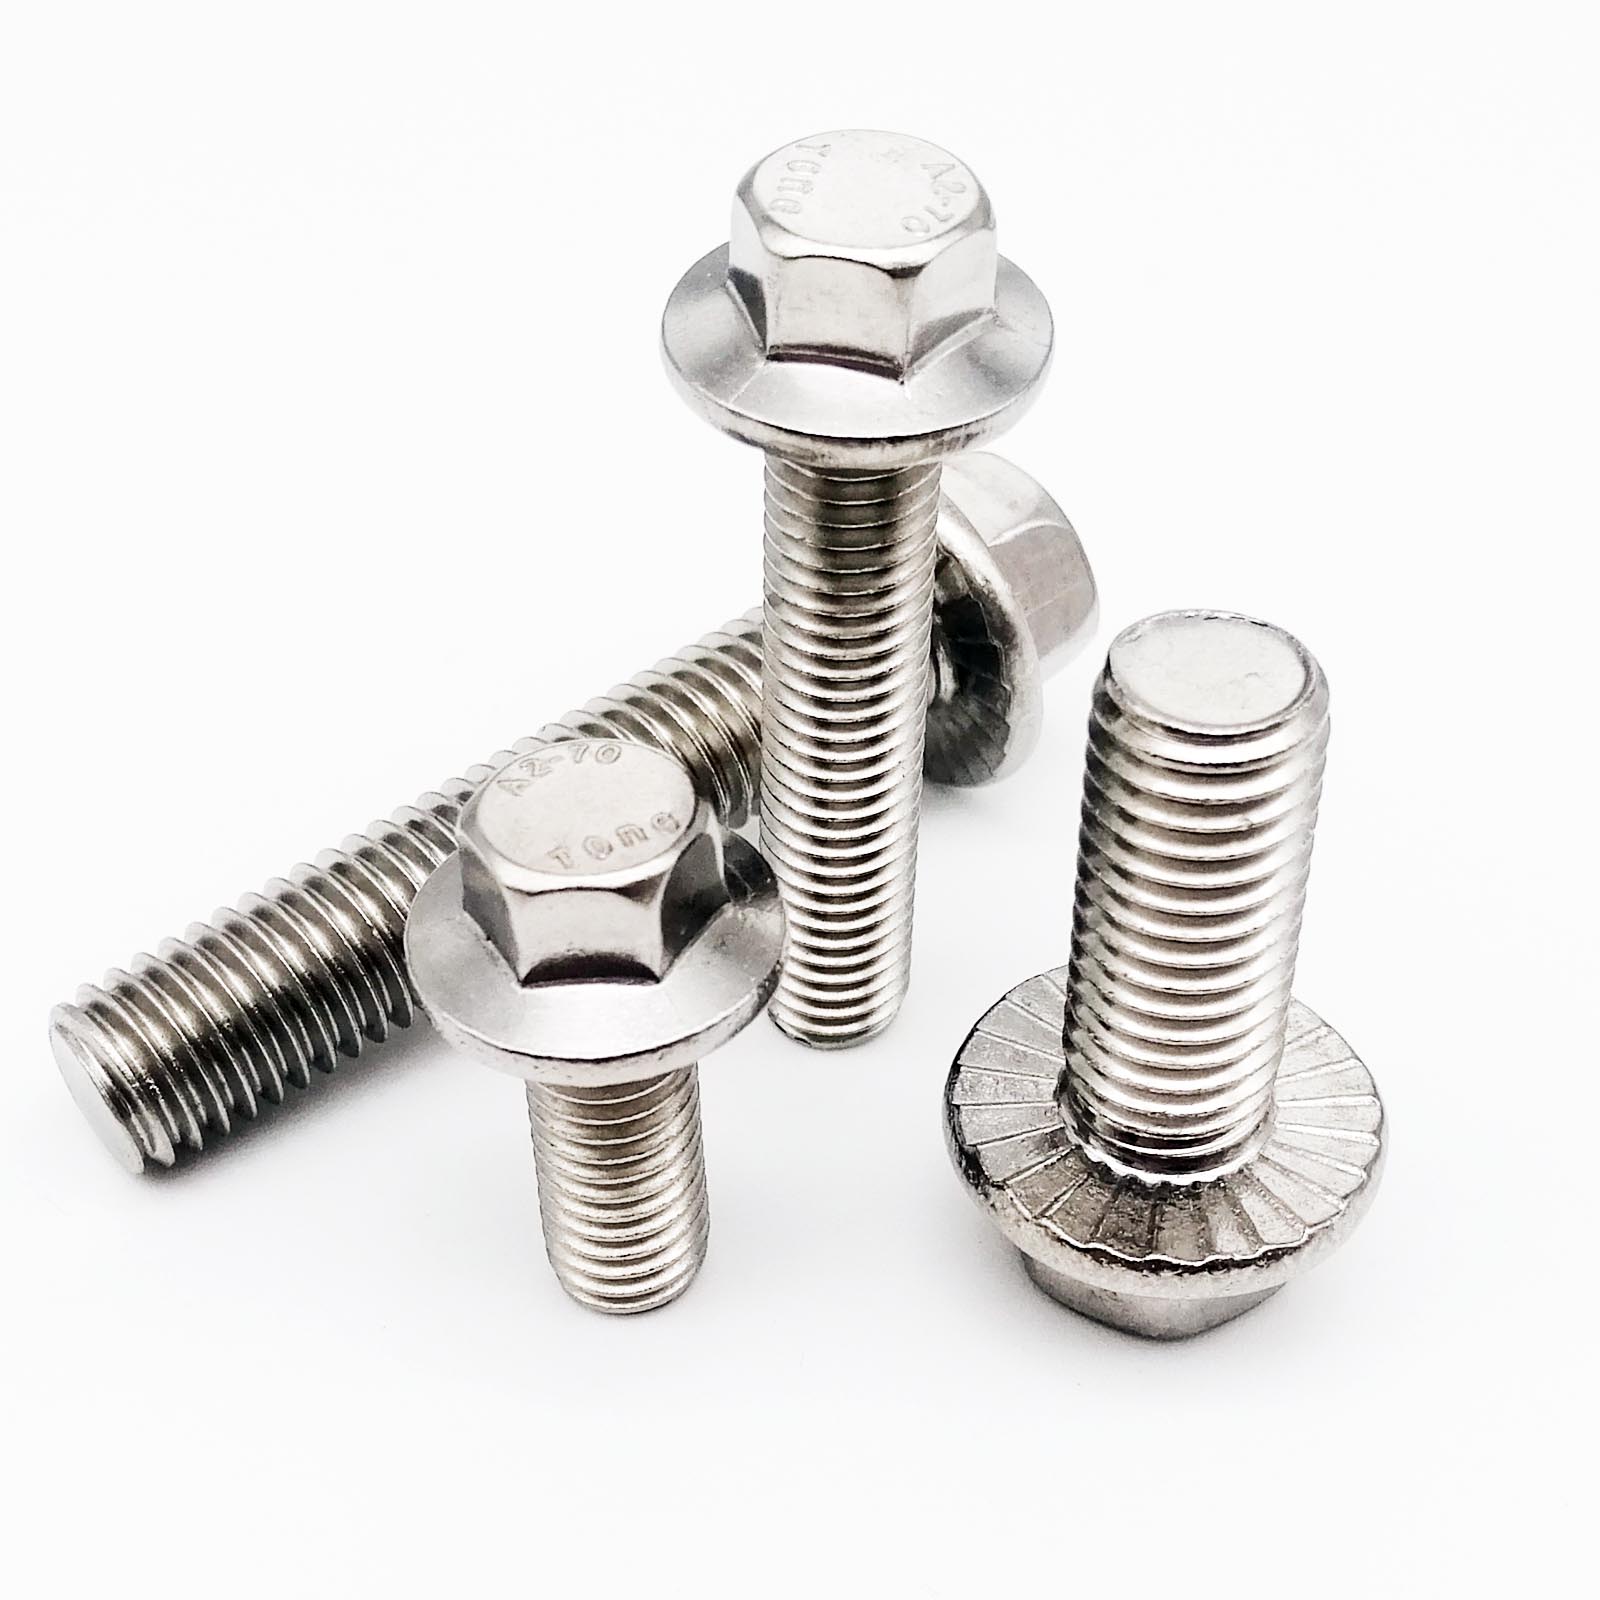 A2 Stainless Steel Flange Nuts to Fit Metric Bolts &Screw M3,M4,M5,M6,M8,M10,M12